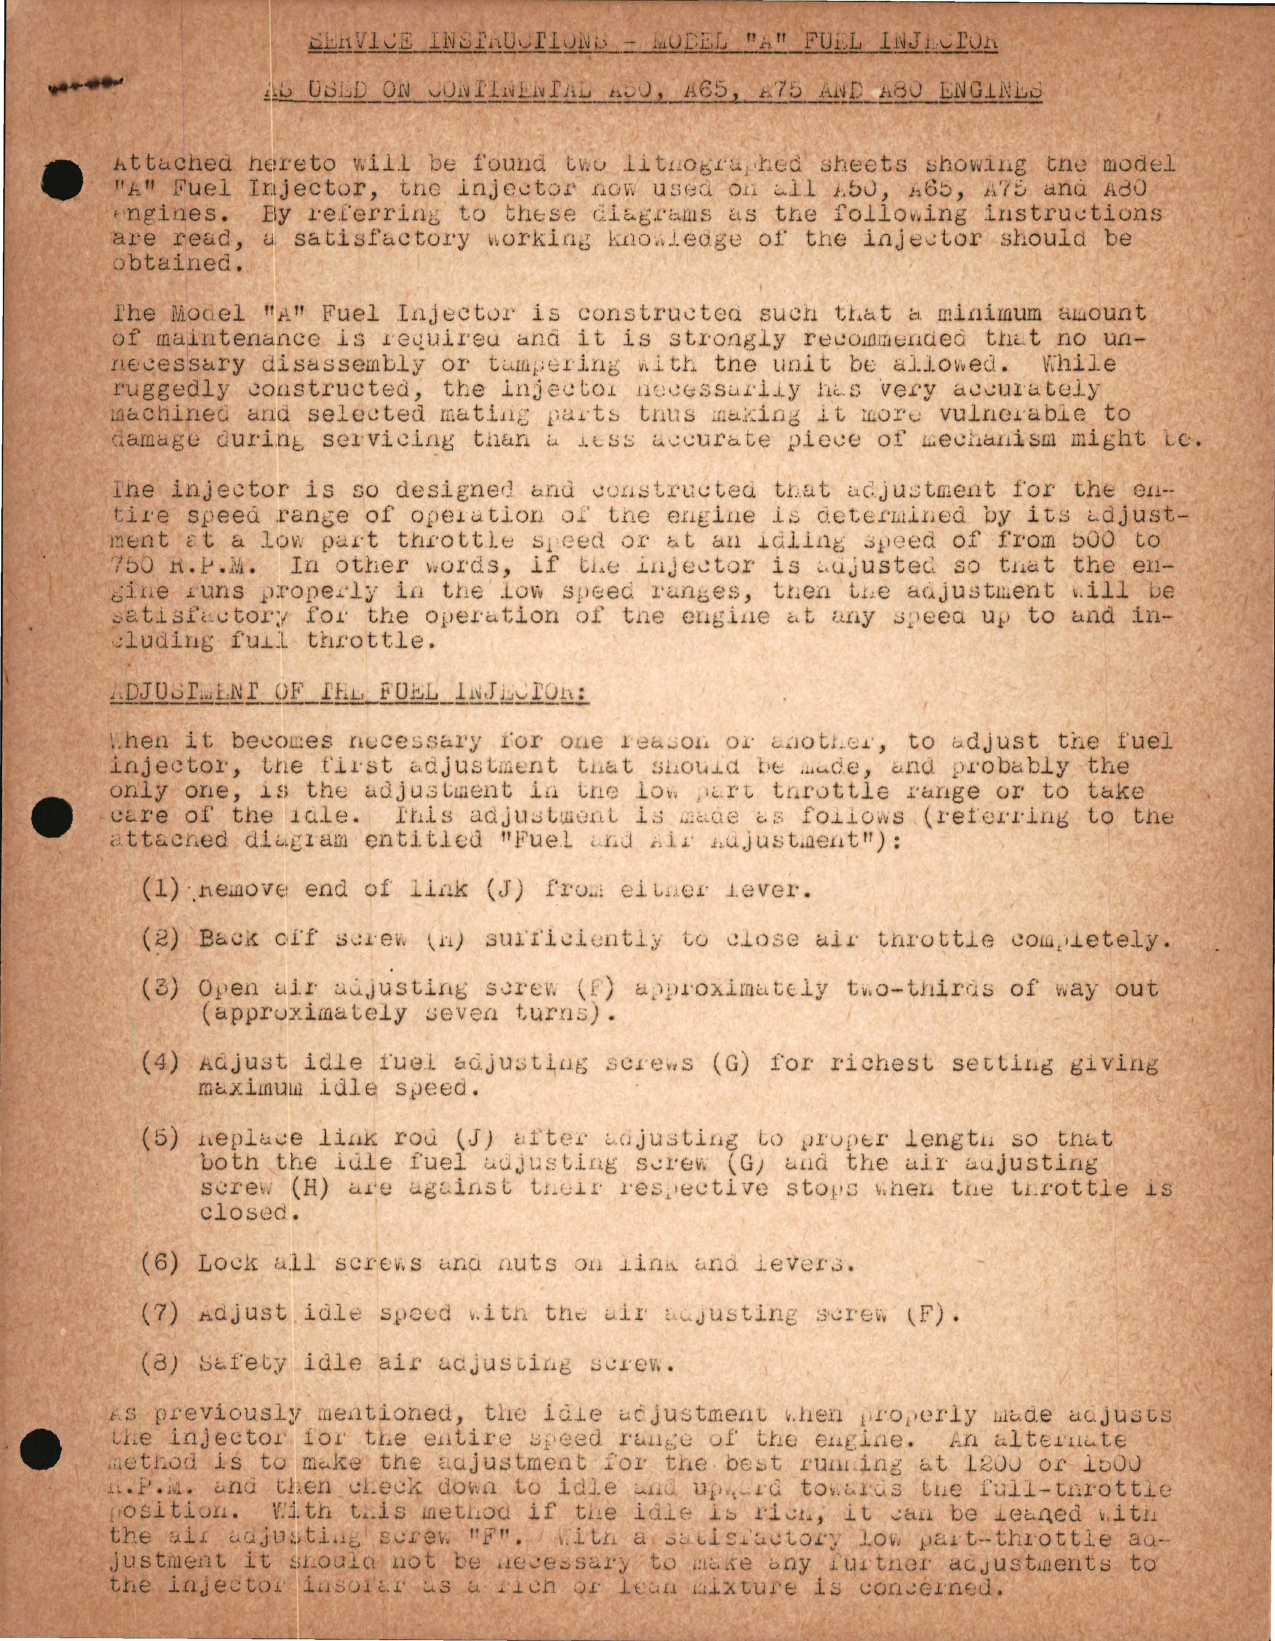 Sample page 1 from AirCorps Library document: Service Instructions for Model A Fuel Injector - Used on Continental A50, A65, A75, and A80 Engines